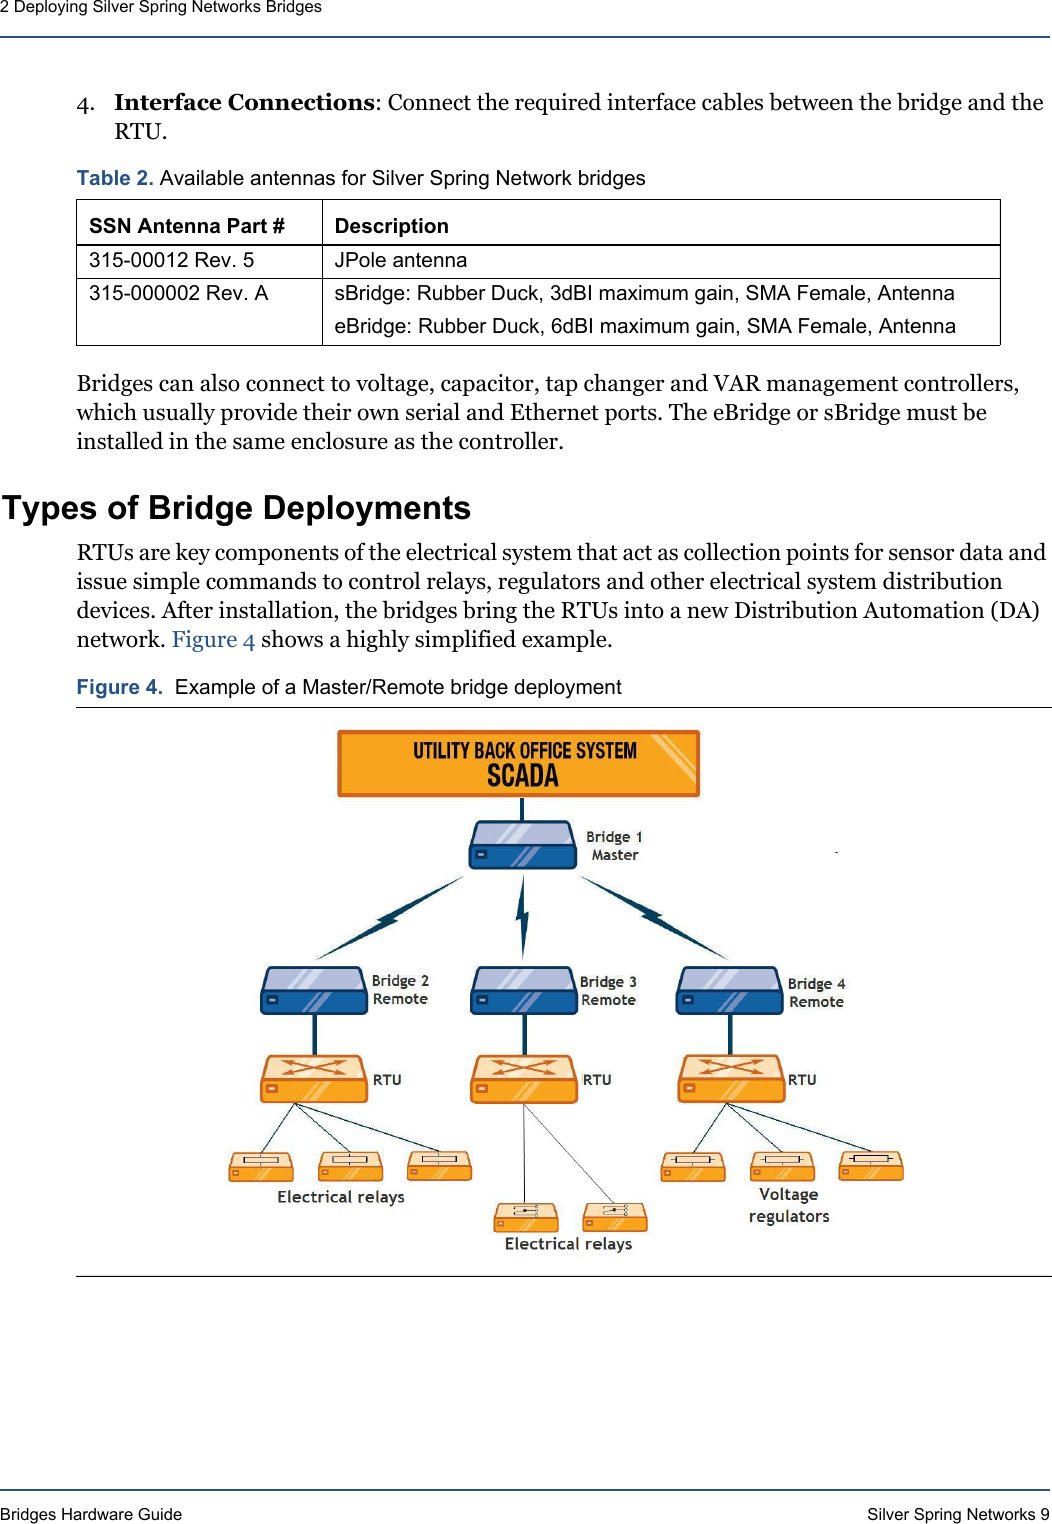 Bridges Hardware Guide Silver Spring Networks 92 Deploying Silver Spring Networks Bridges4. Interface Connections: Connect the required interface cables between the bridge and the RTU. Bridges can also connect to voltage, capacitor, tap changer and VAR management controllers, which usually provide their own serial and Ethernet ports. The eBridge or sBridge must be installed in the same enclosure as the controller.Types of Bridge DeploymentsRTUs are key components of the electrical system that act as collection points for sensor data and issue simple commands to control relays, regulators and other electrical system distribution devices. After installation, the bridges bring the RTUs into a new Distribution Automation (DA) network. Figure 4 shows a highly simplified example.Table 2. Available antennas for Silver Spring Network bridgesSSN Antenna Part # Description315-00012 Rev. 5 JPole antenna315-000002 Rev. A sBridge: Rubber Duck, 3dBI maximum gain, SMA Female, AntennaeBridge: Rubber Duck, 6dBI maximum gain, SMA Female, AntennaFigure 4.  Example of a Master/Remote bridge deployment